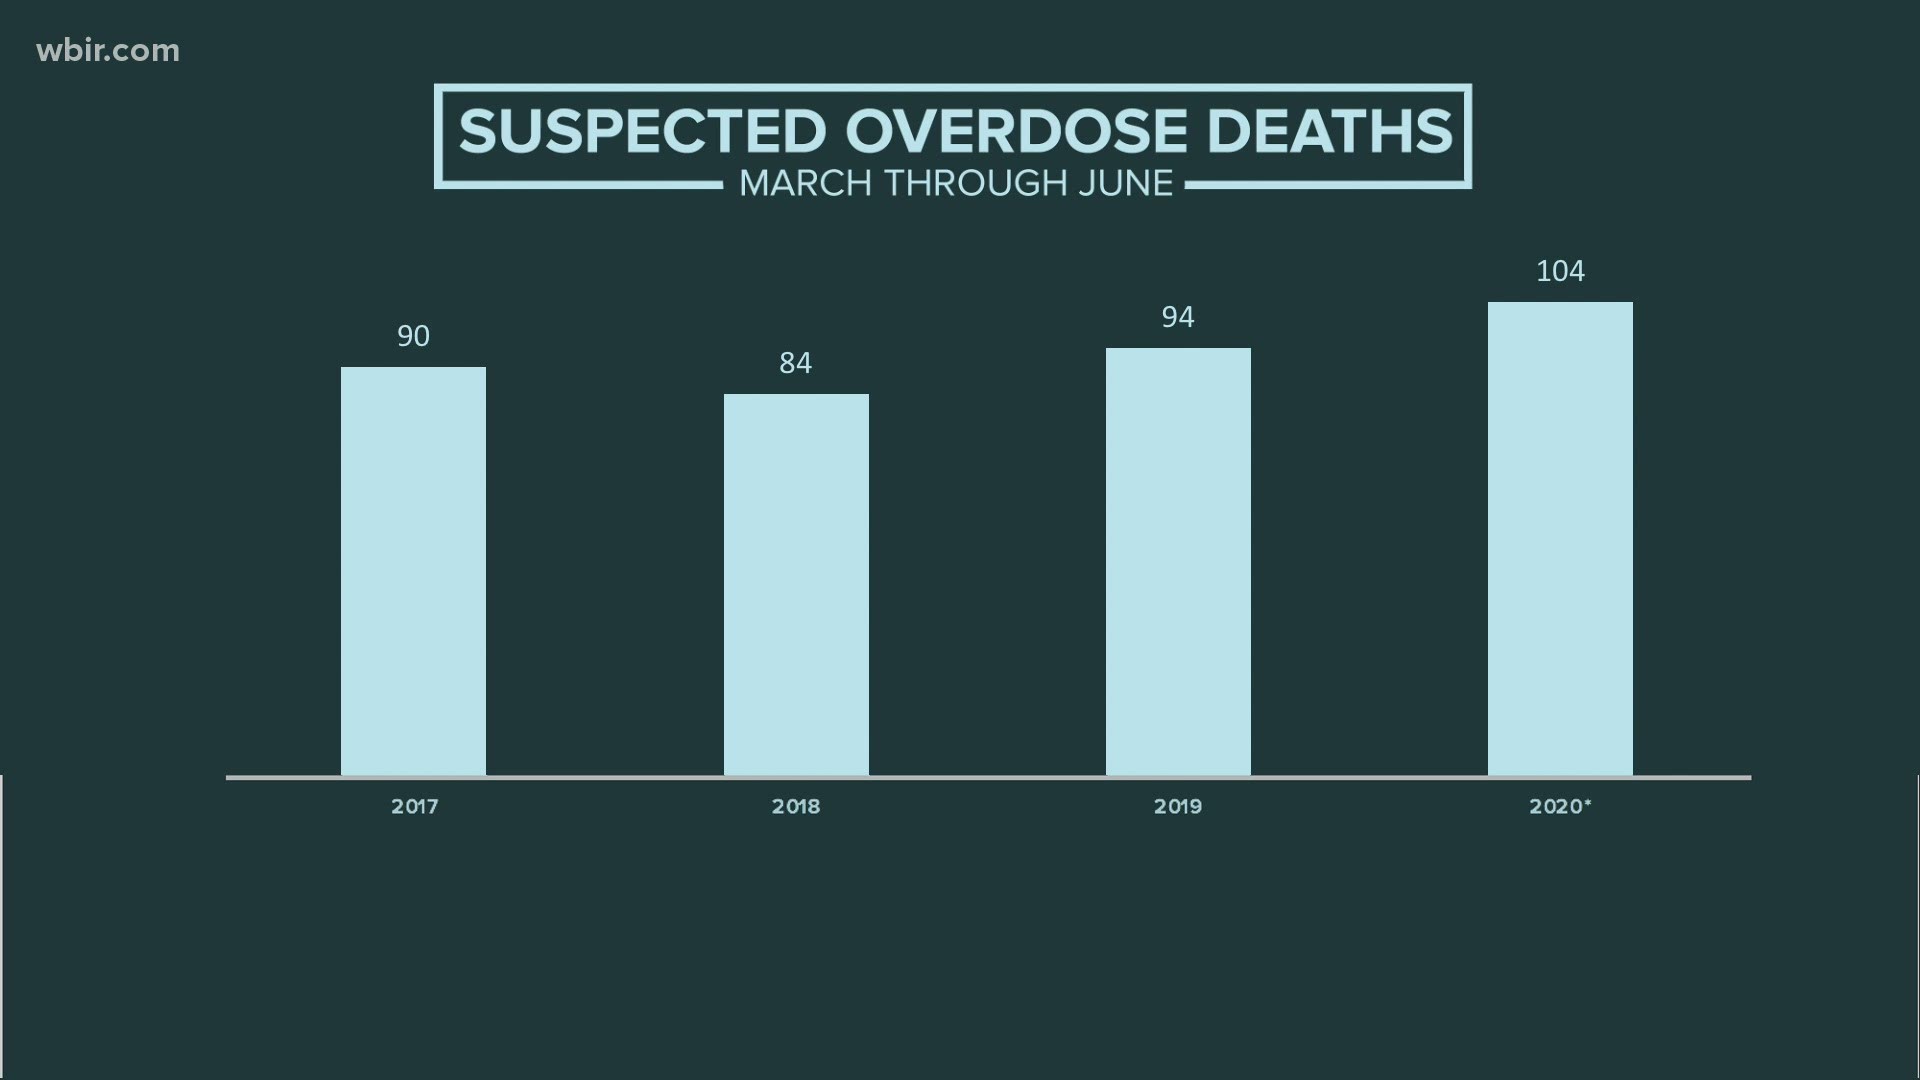 Since the beginning of March, the Knox County District Attorney General's Office has reported 104 suspected overdose deaths.